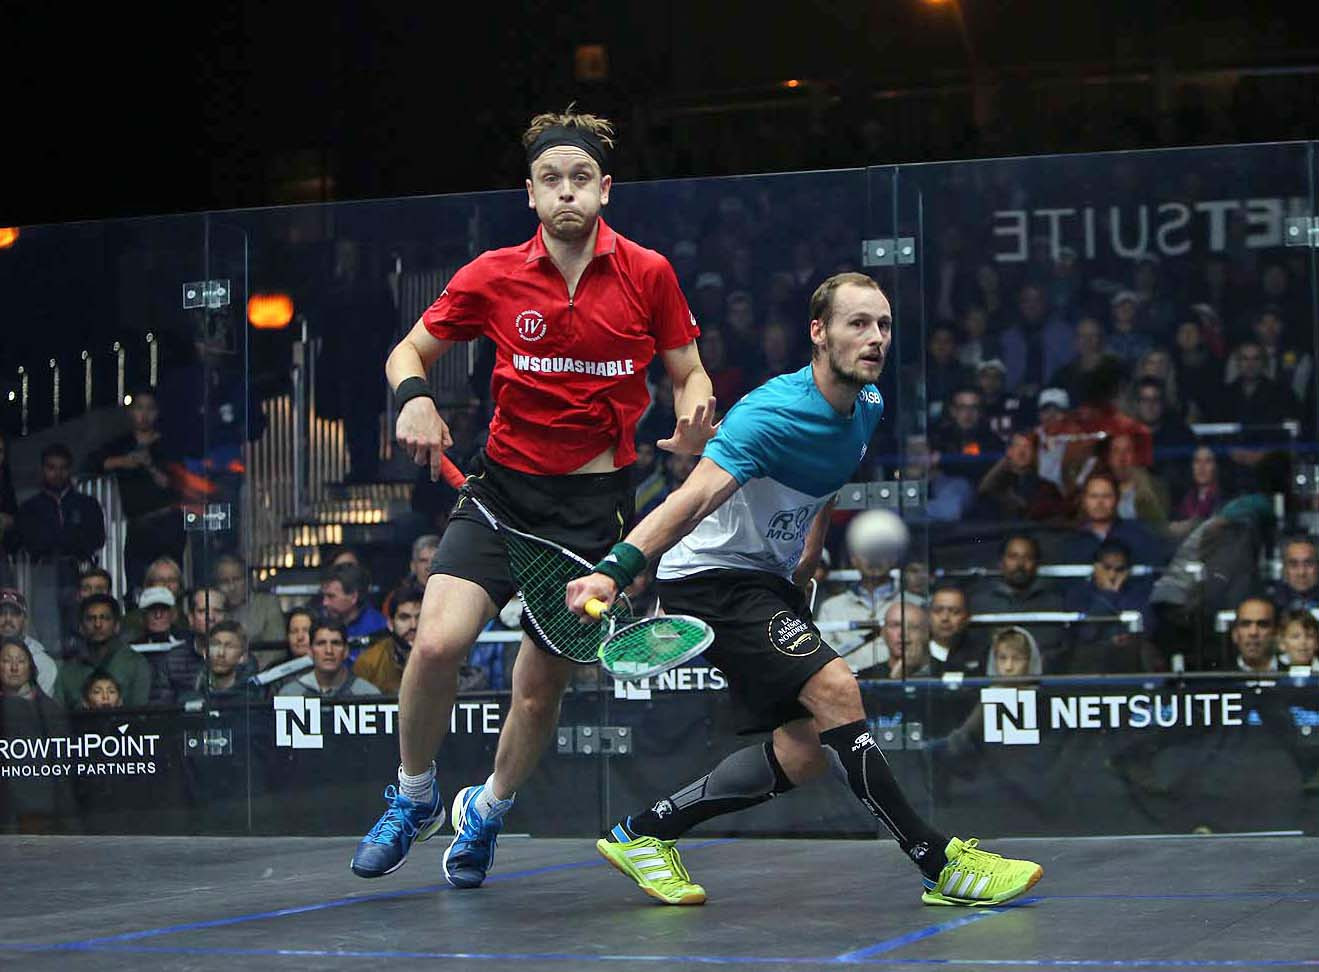 Gregory Gaultier, right, who has had to withdraw from the Oracle NetSuite Open due to an ankle injury ©PSA